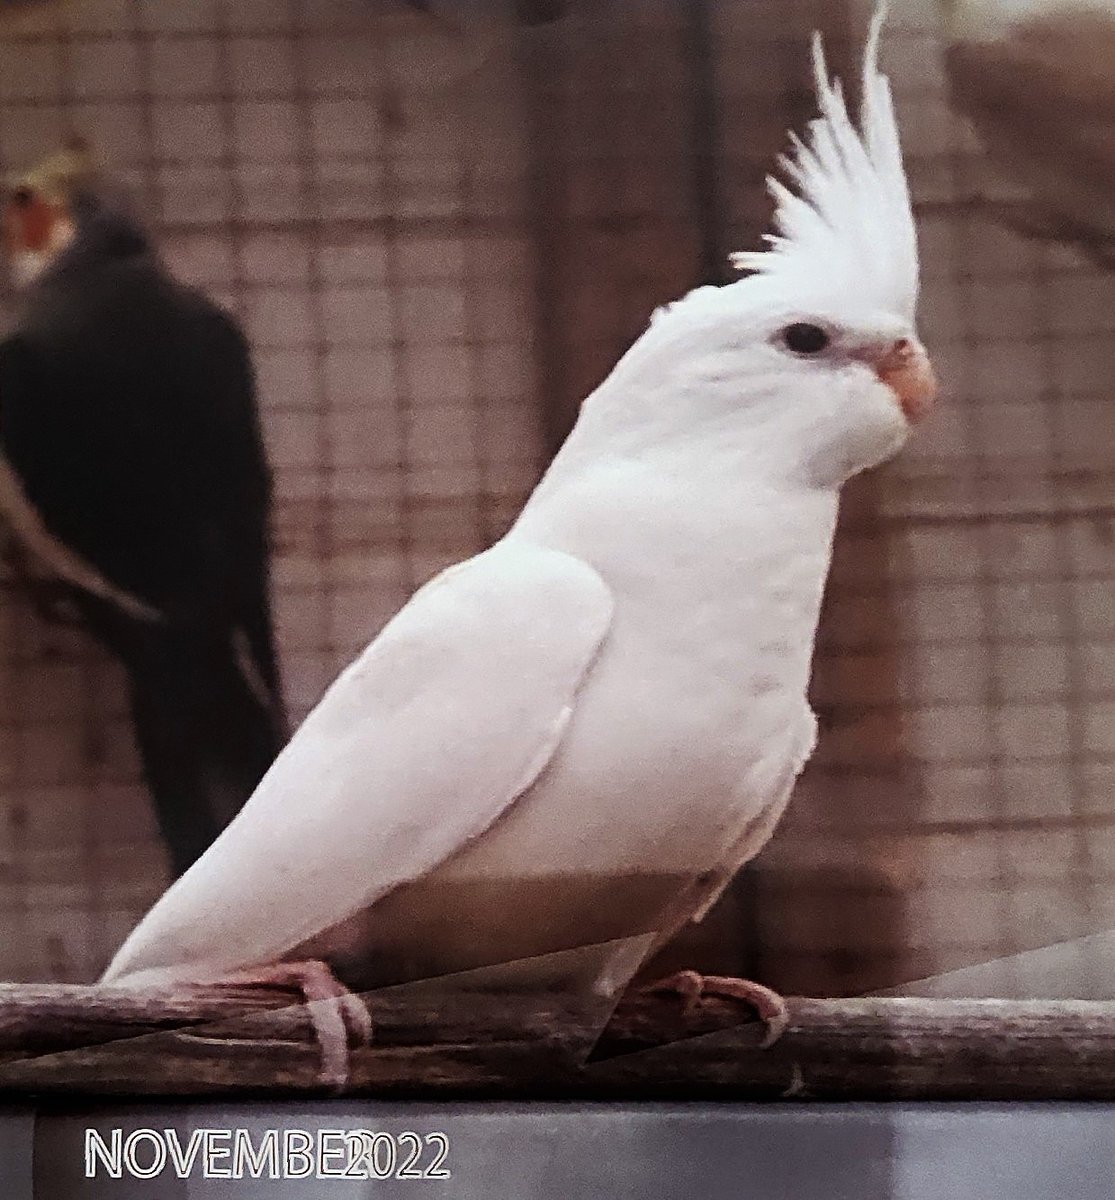 Finishing up this month we have a beautiful white cockatiel serenely perching. #ParrotCalendarOfTheMonth @ParrotOfTheDay